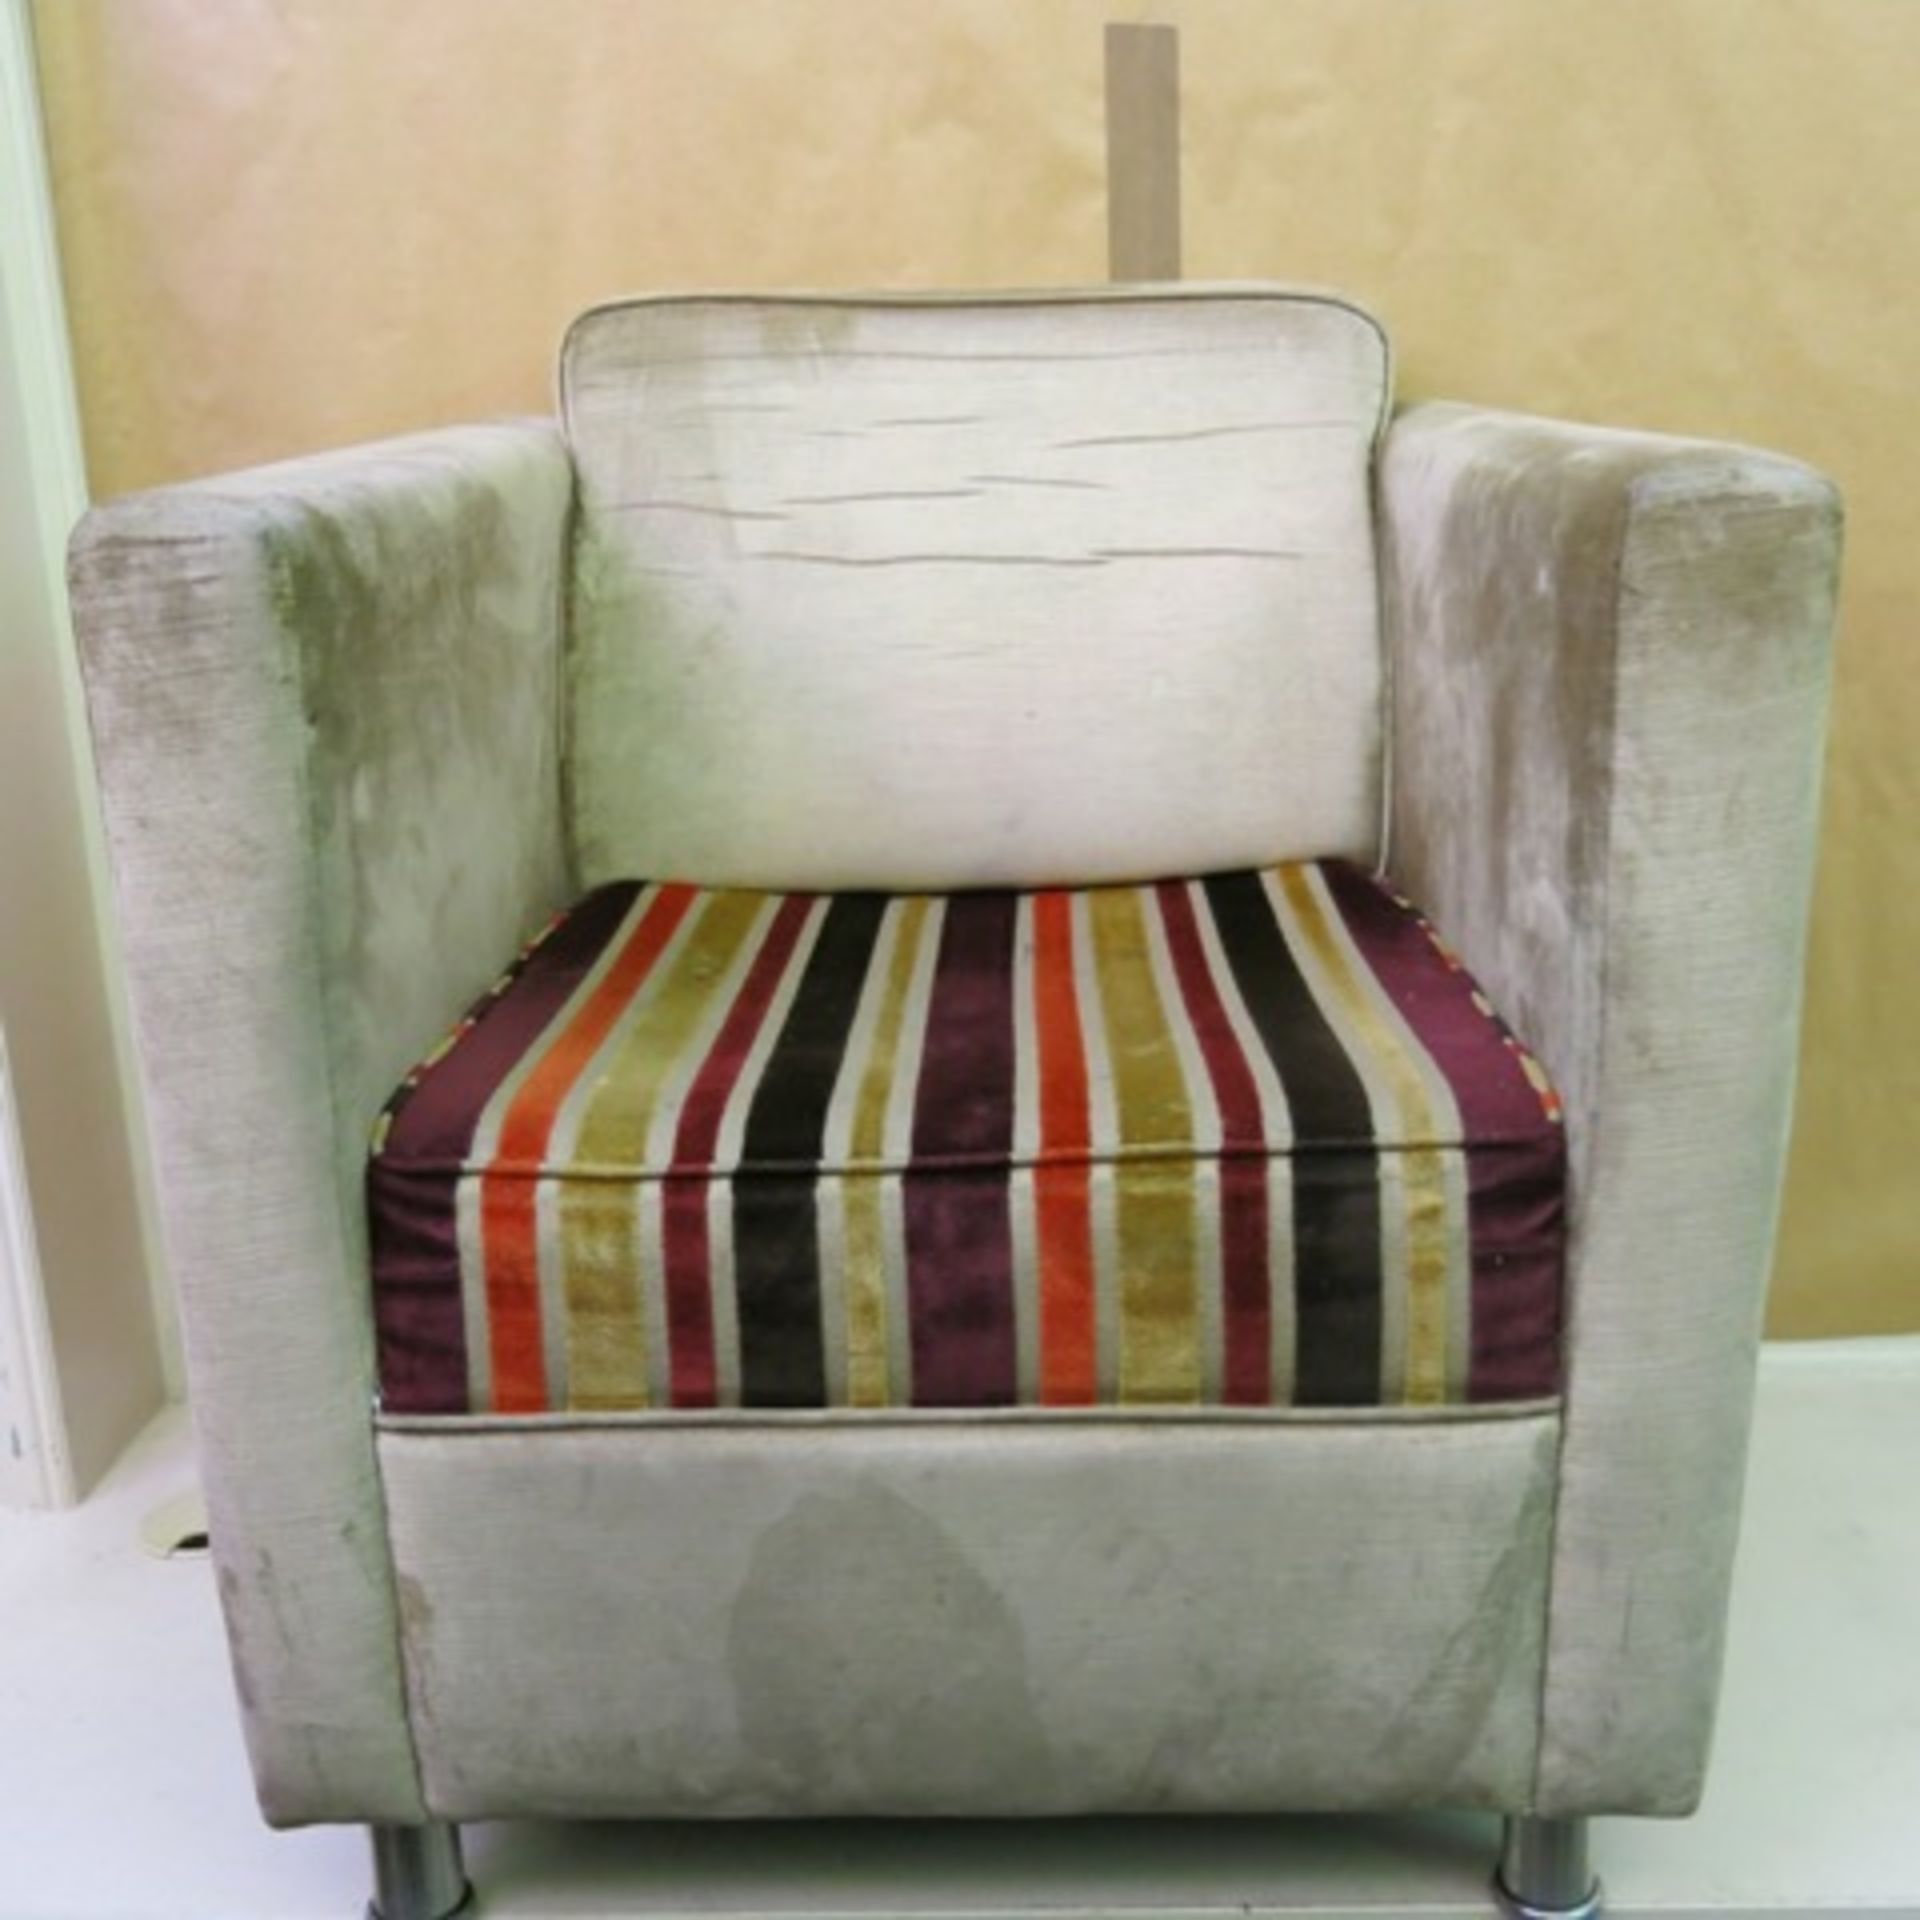 2 x Armchairs Upholstered in Multi-coloured Fabric on Metal Legs - Image 10 of 10